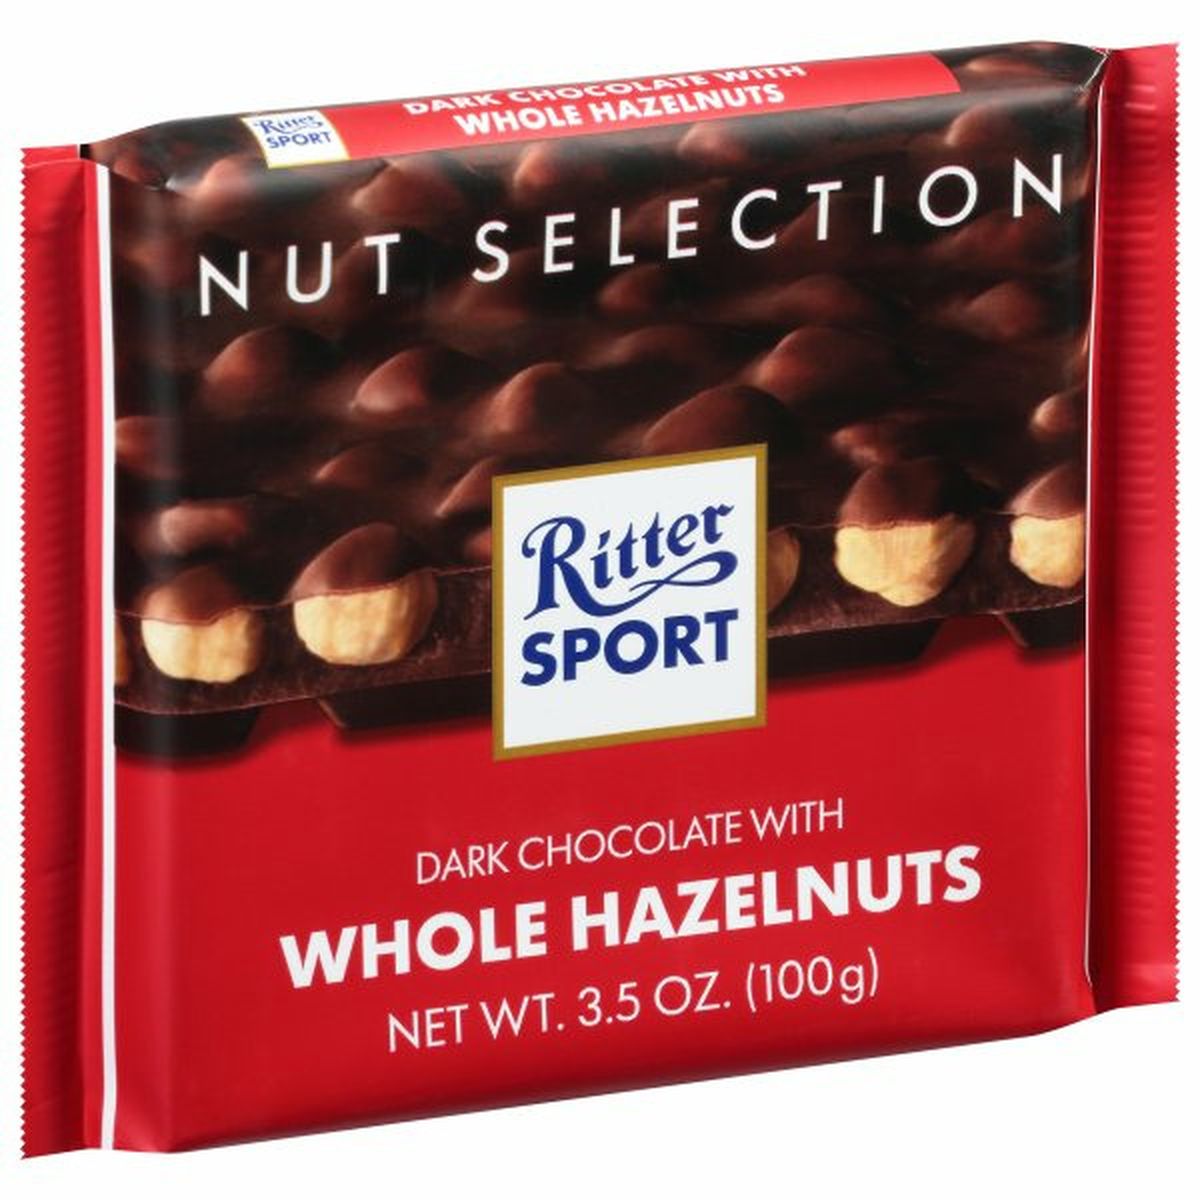 Calories in Ritter Sport Dark Chocolate, with Whole Hazelnuts